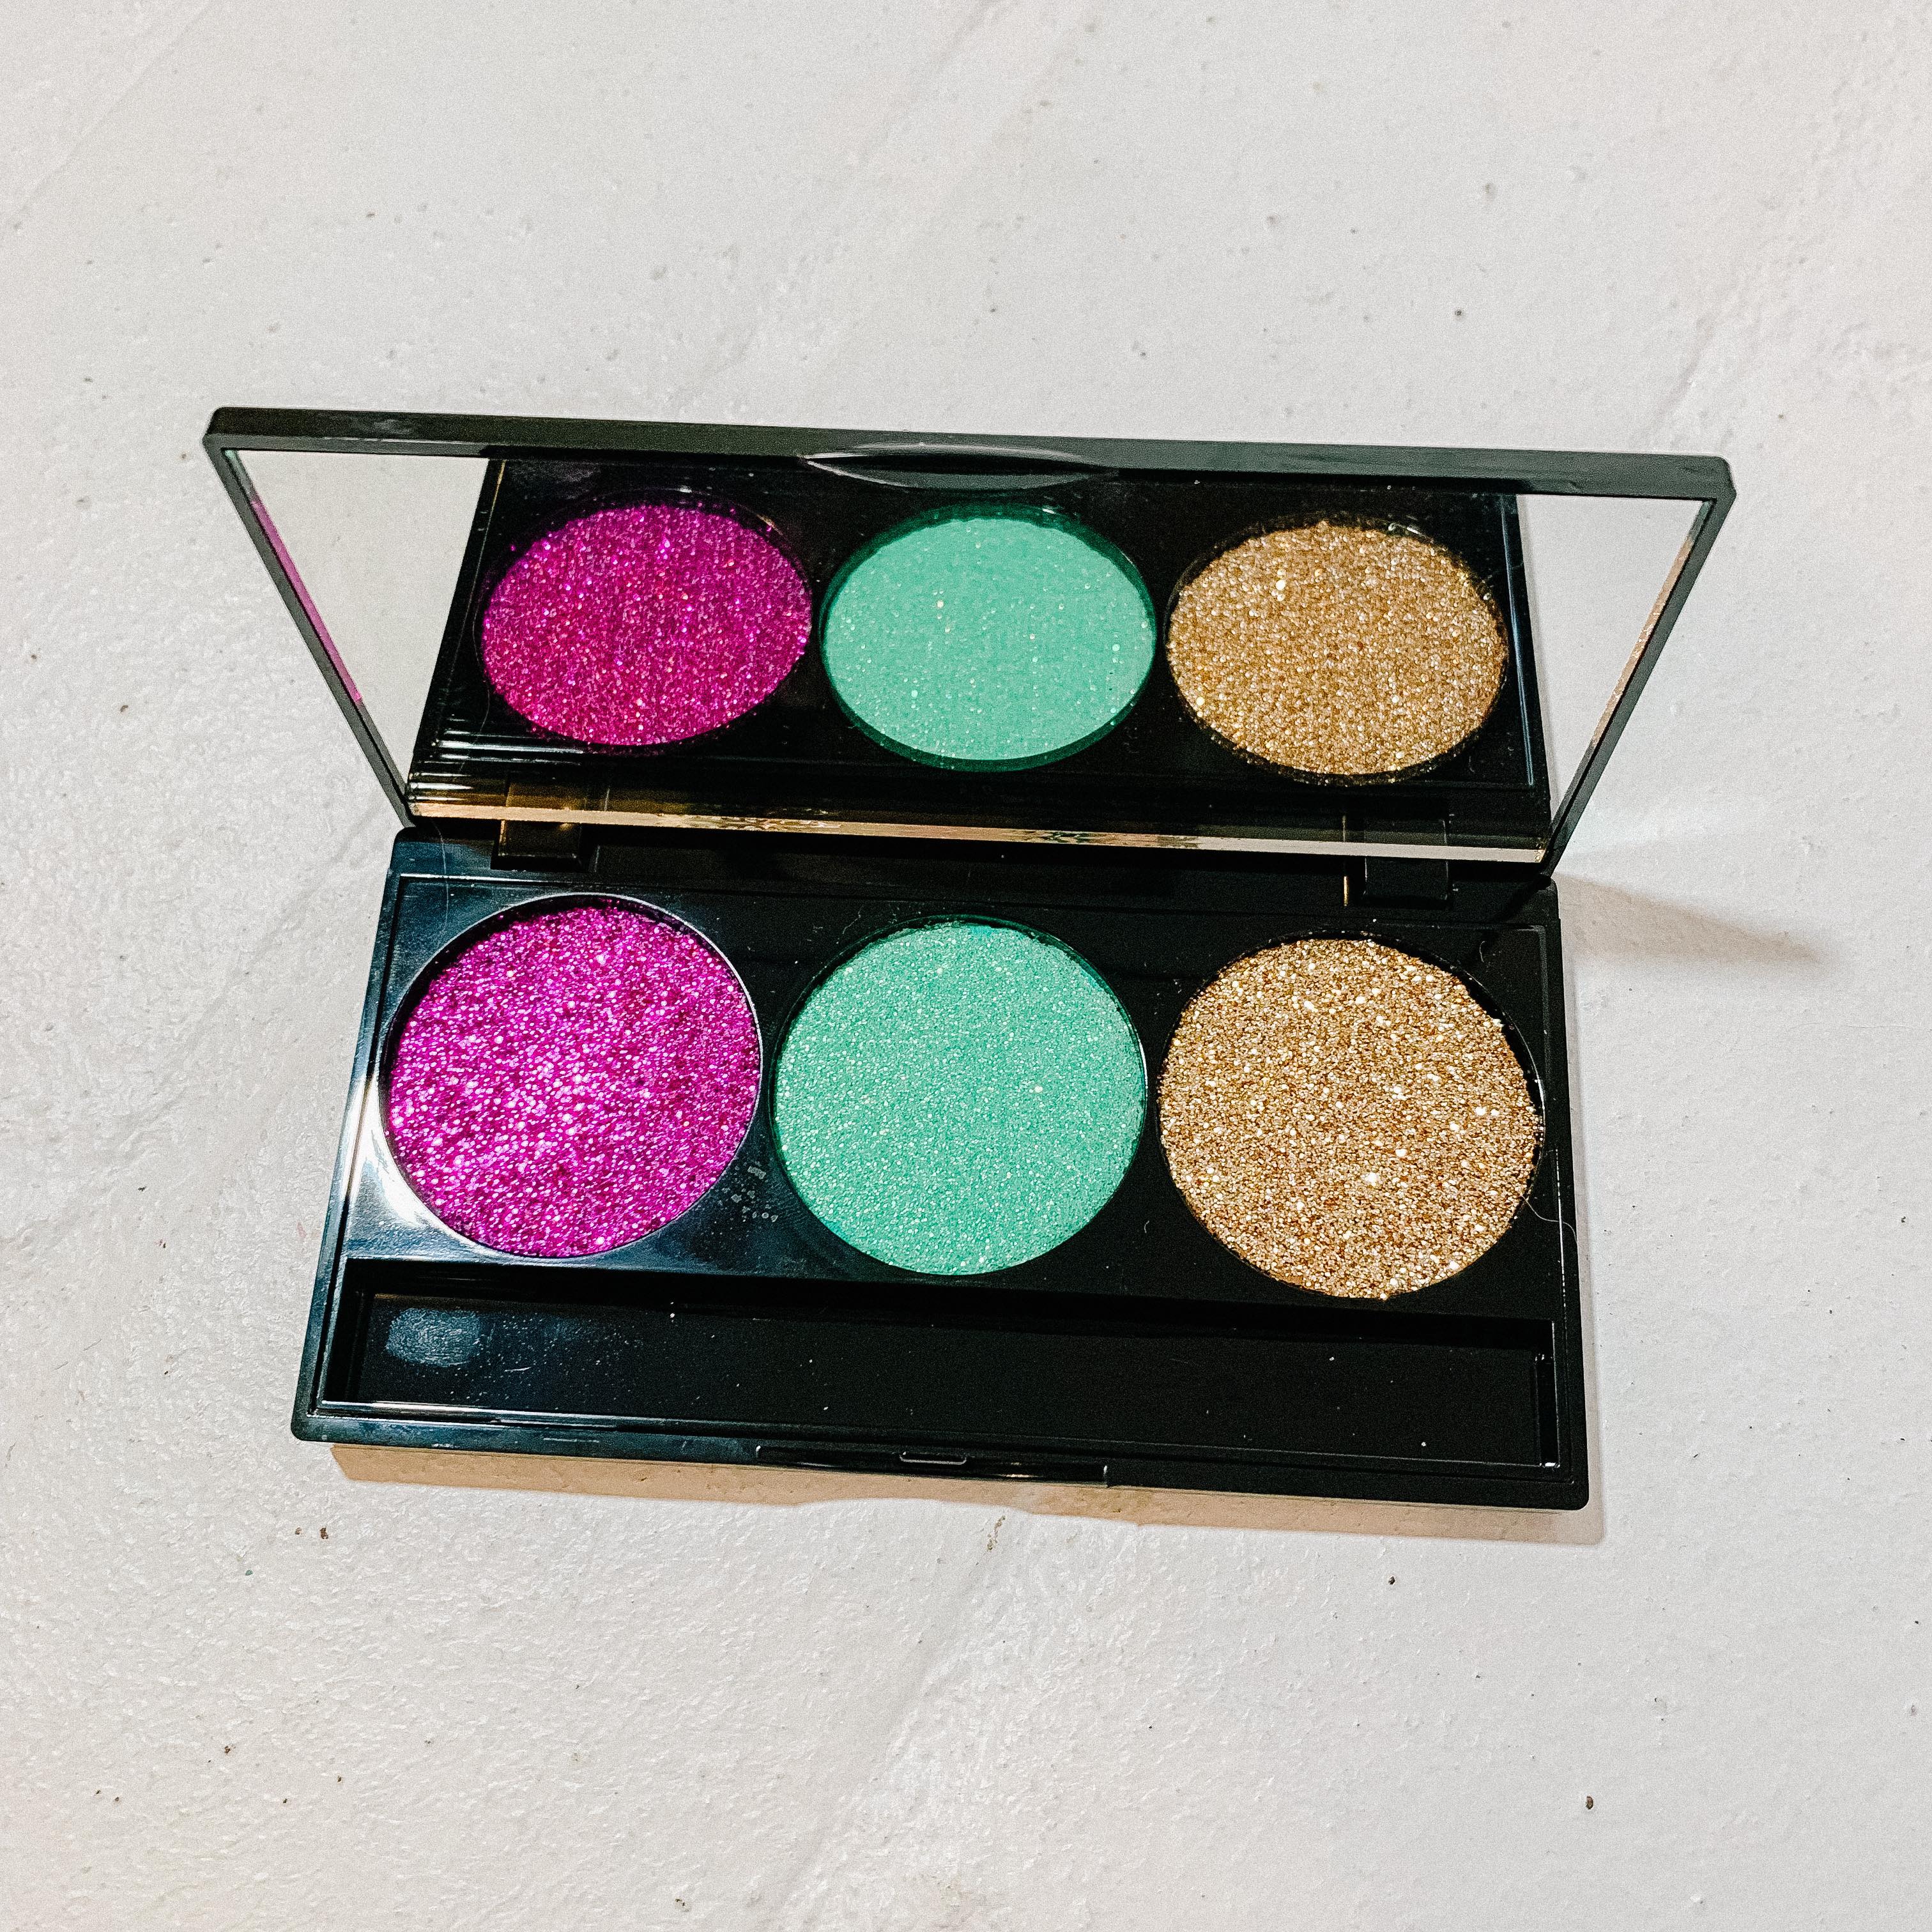 Disco Glam Eyeshadow 3 or 5 Well Palette (Pretend Makeup)